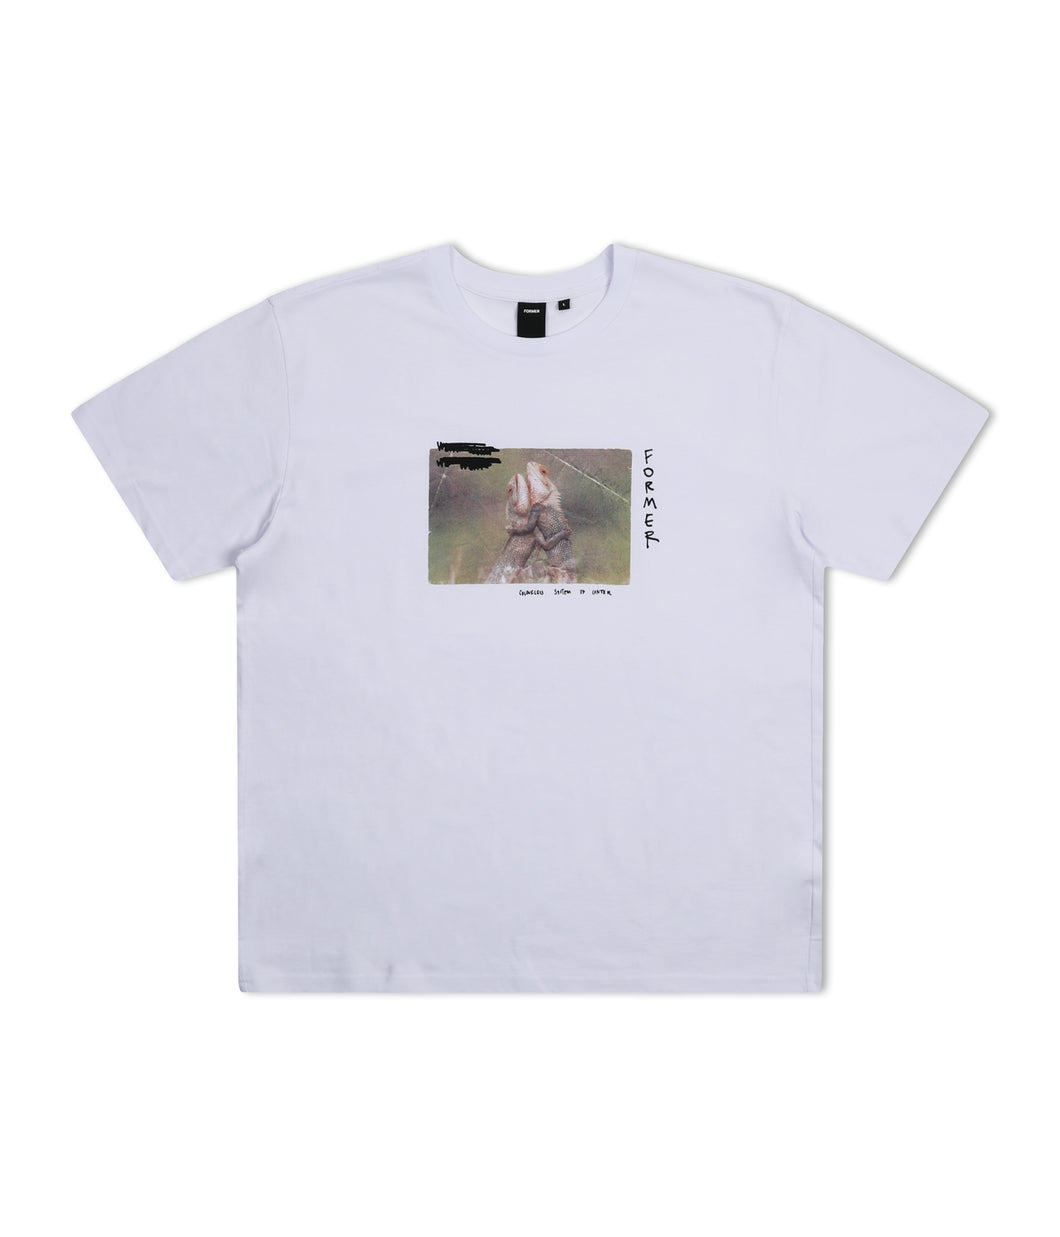 Former - Embrace T-Shirt in White